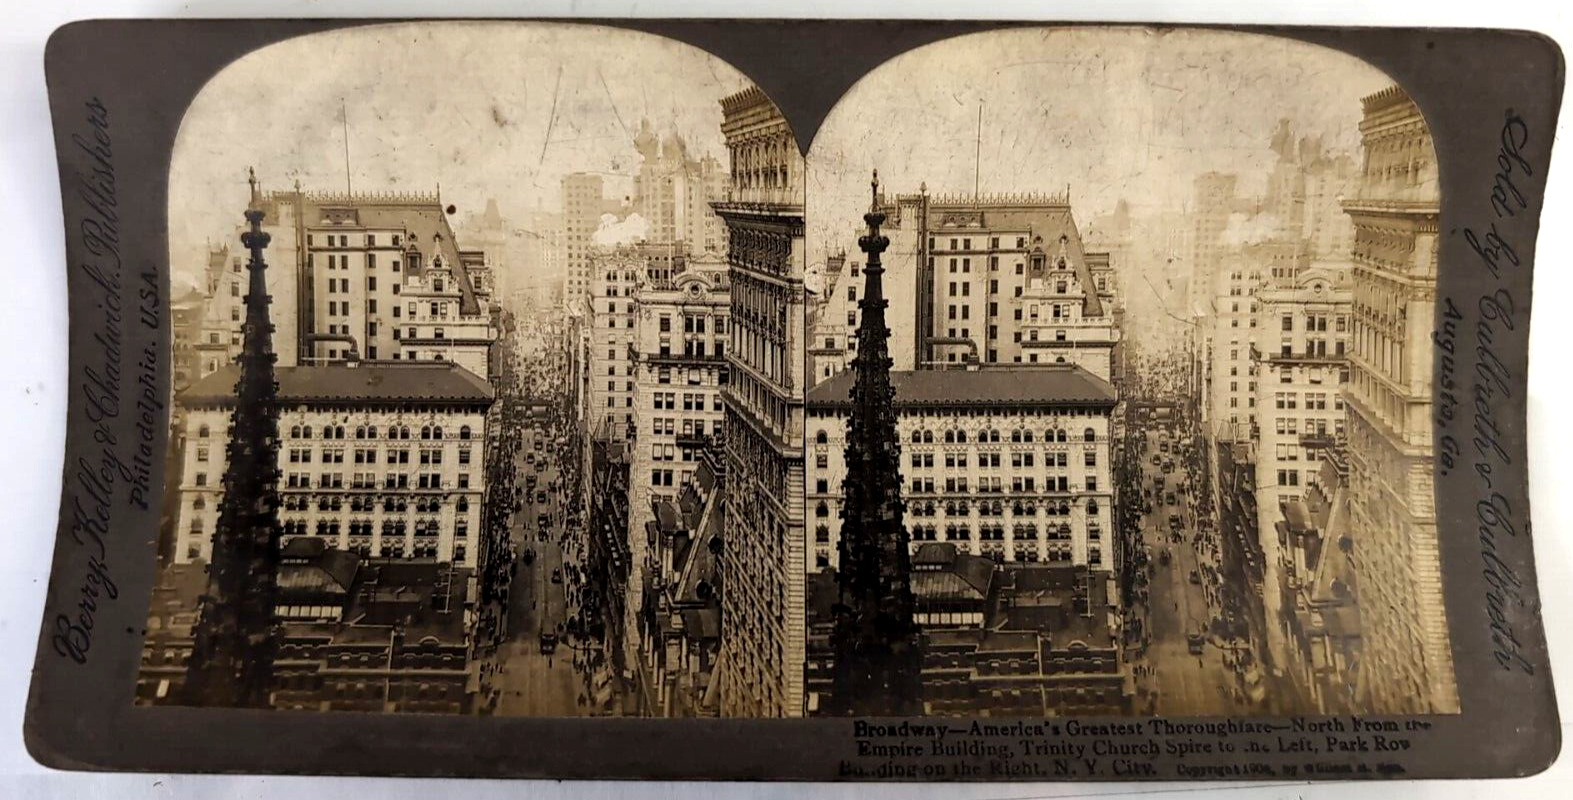 Vintage Stereograph Stereo View Stereoscope Card 1905 NY Broadway w Empire State